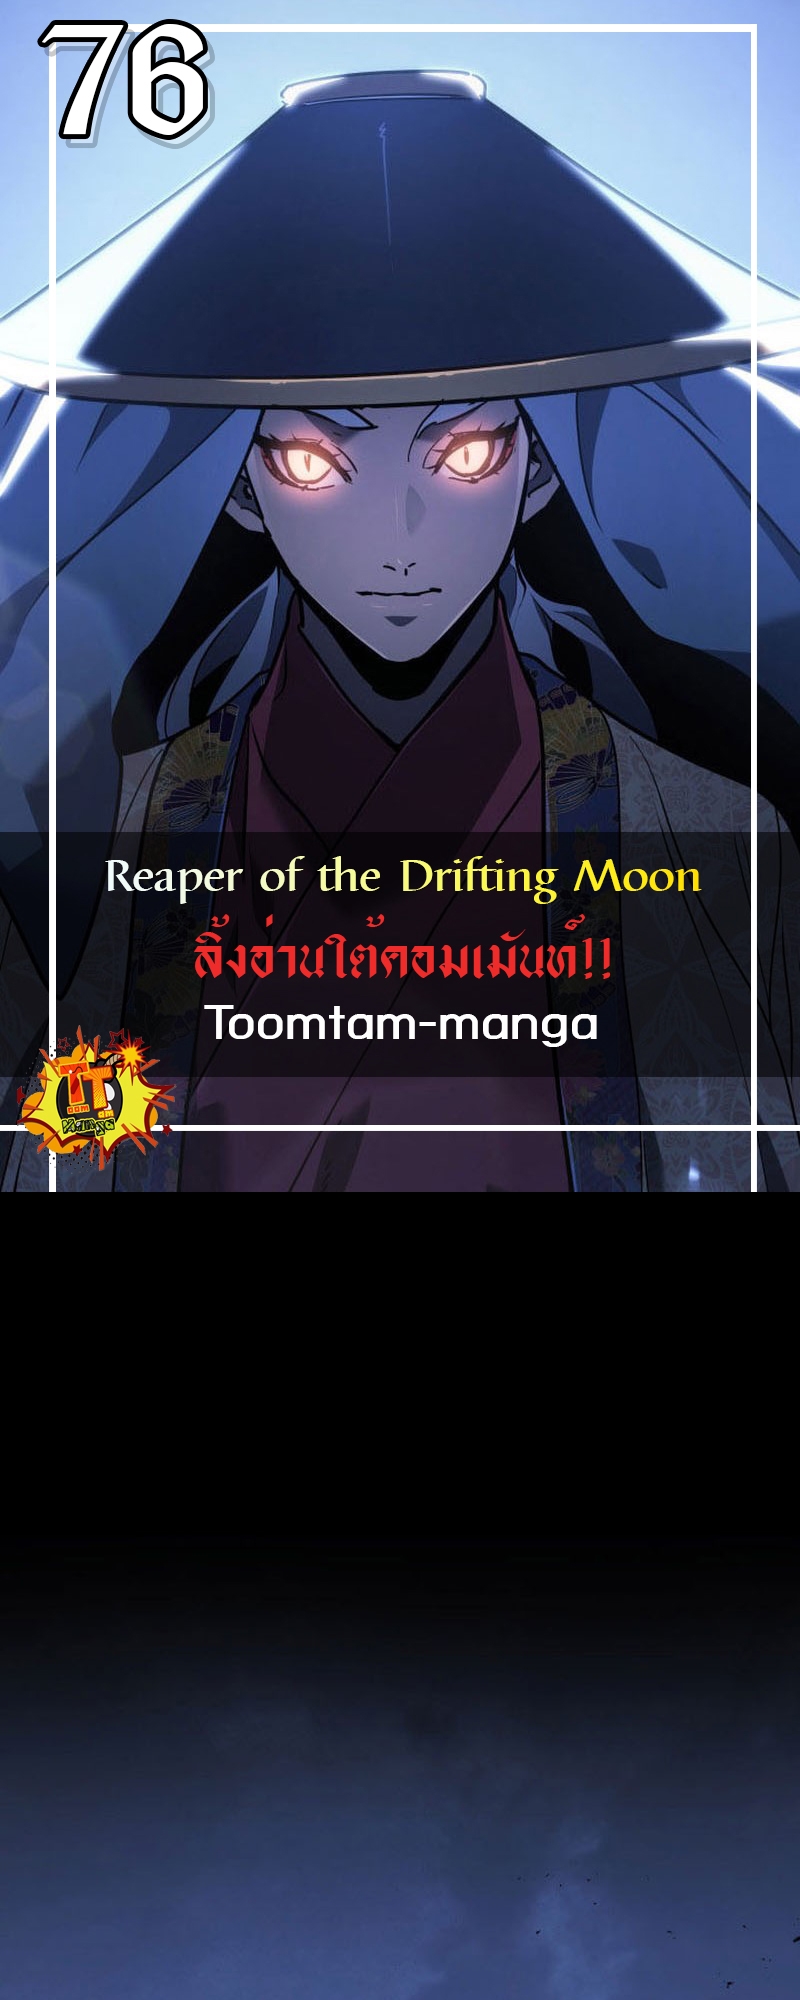 Reaper of the Drifting Moon 76 21 2 25670001